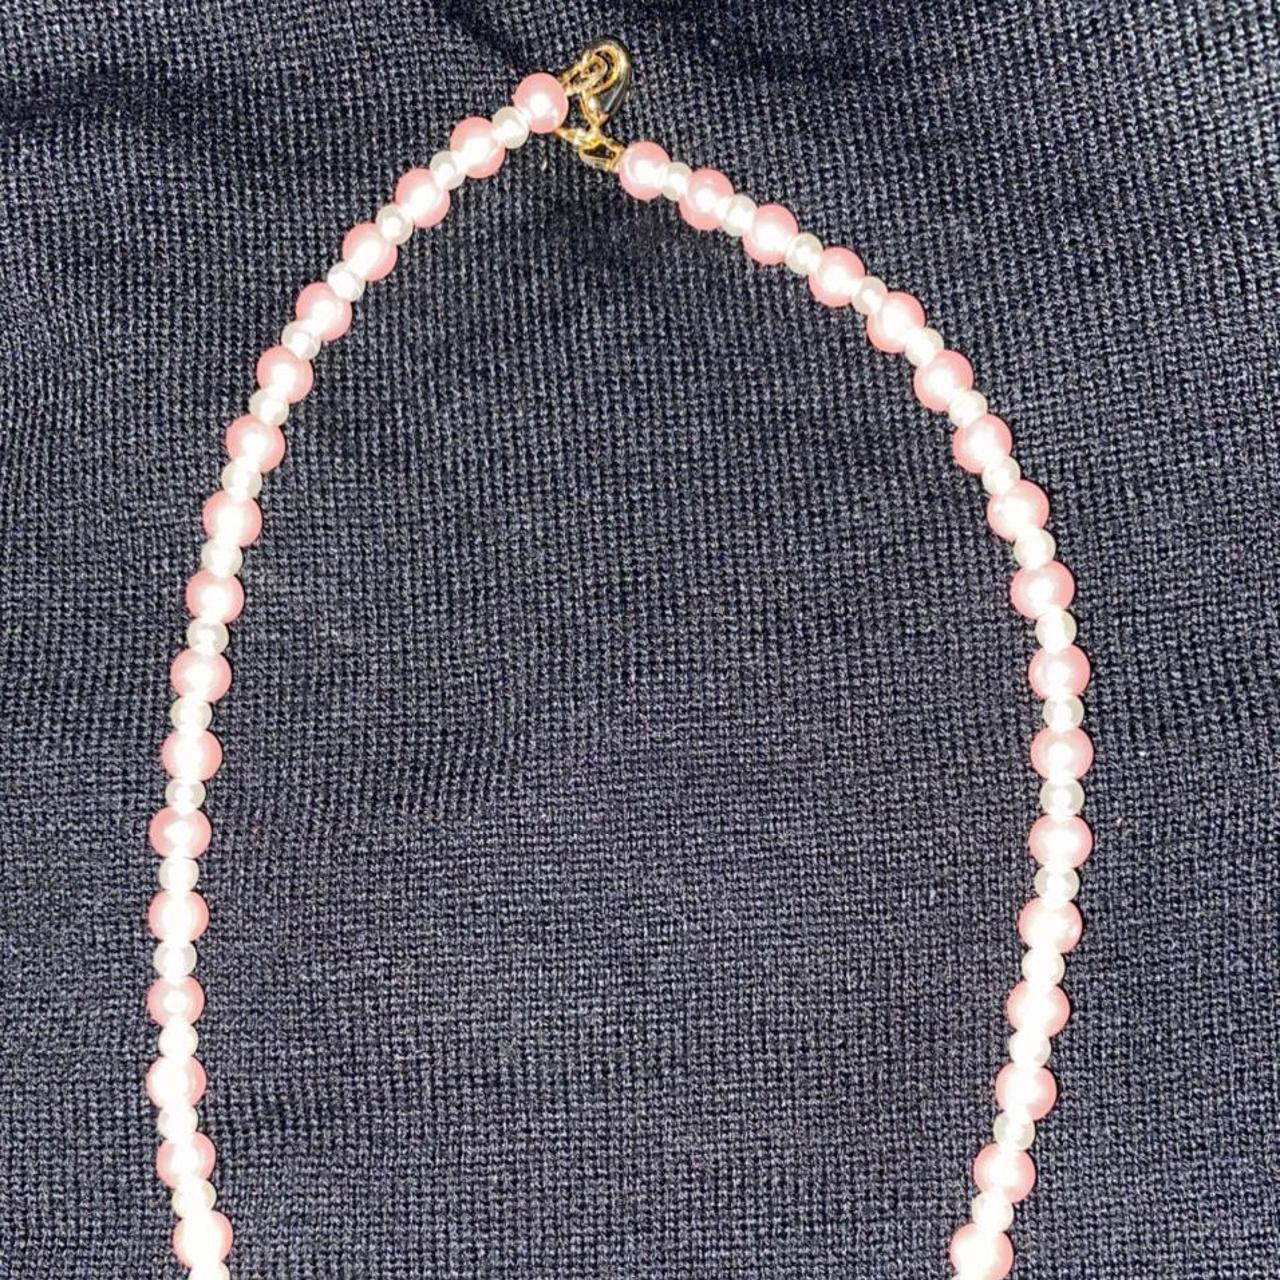 Product Image 2 - pink and white pearl necklace✨
-brand